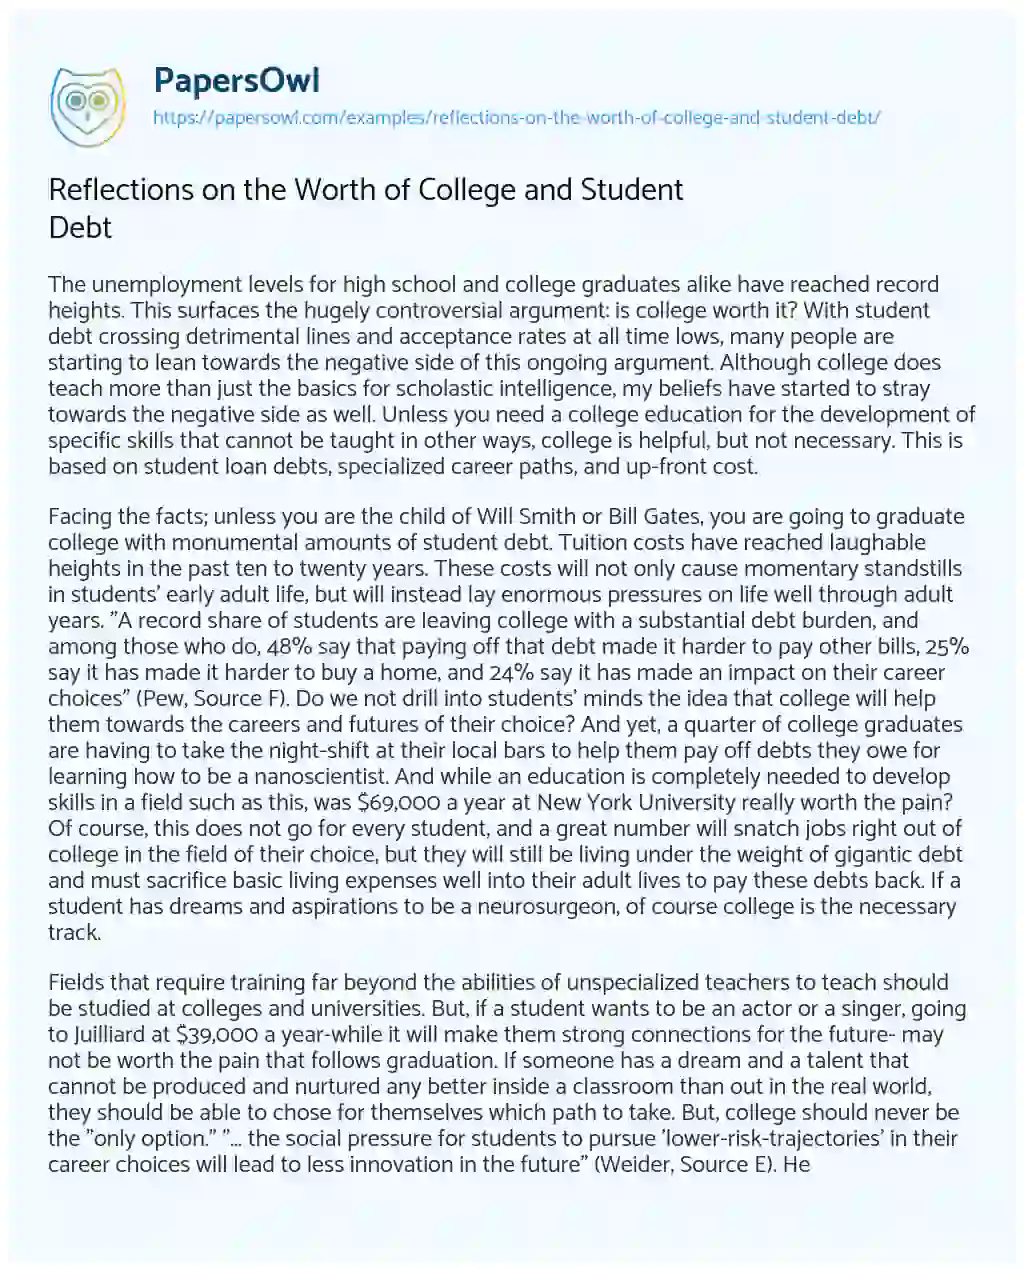 Reflections on the Worth of College and Student Debt essay